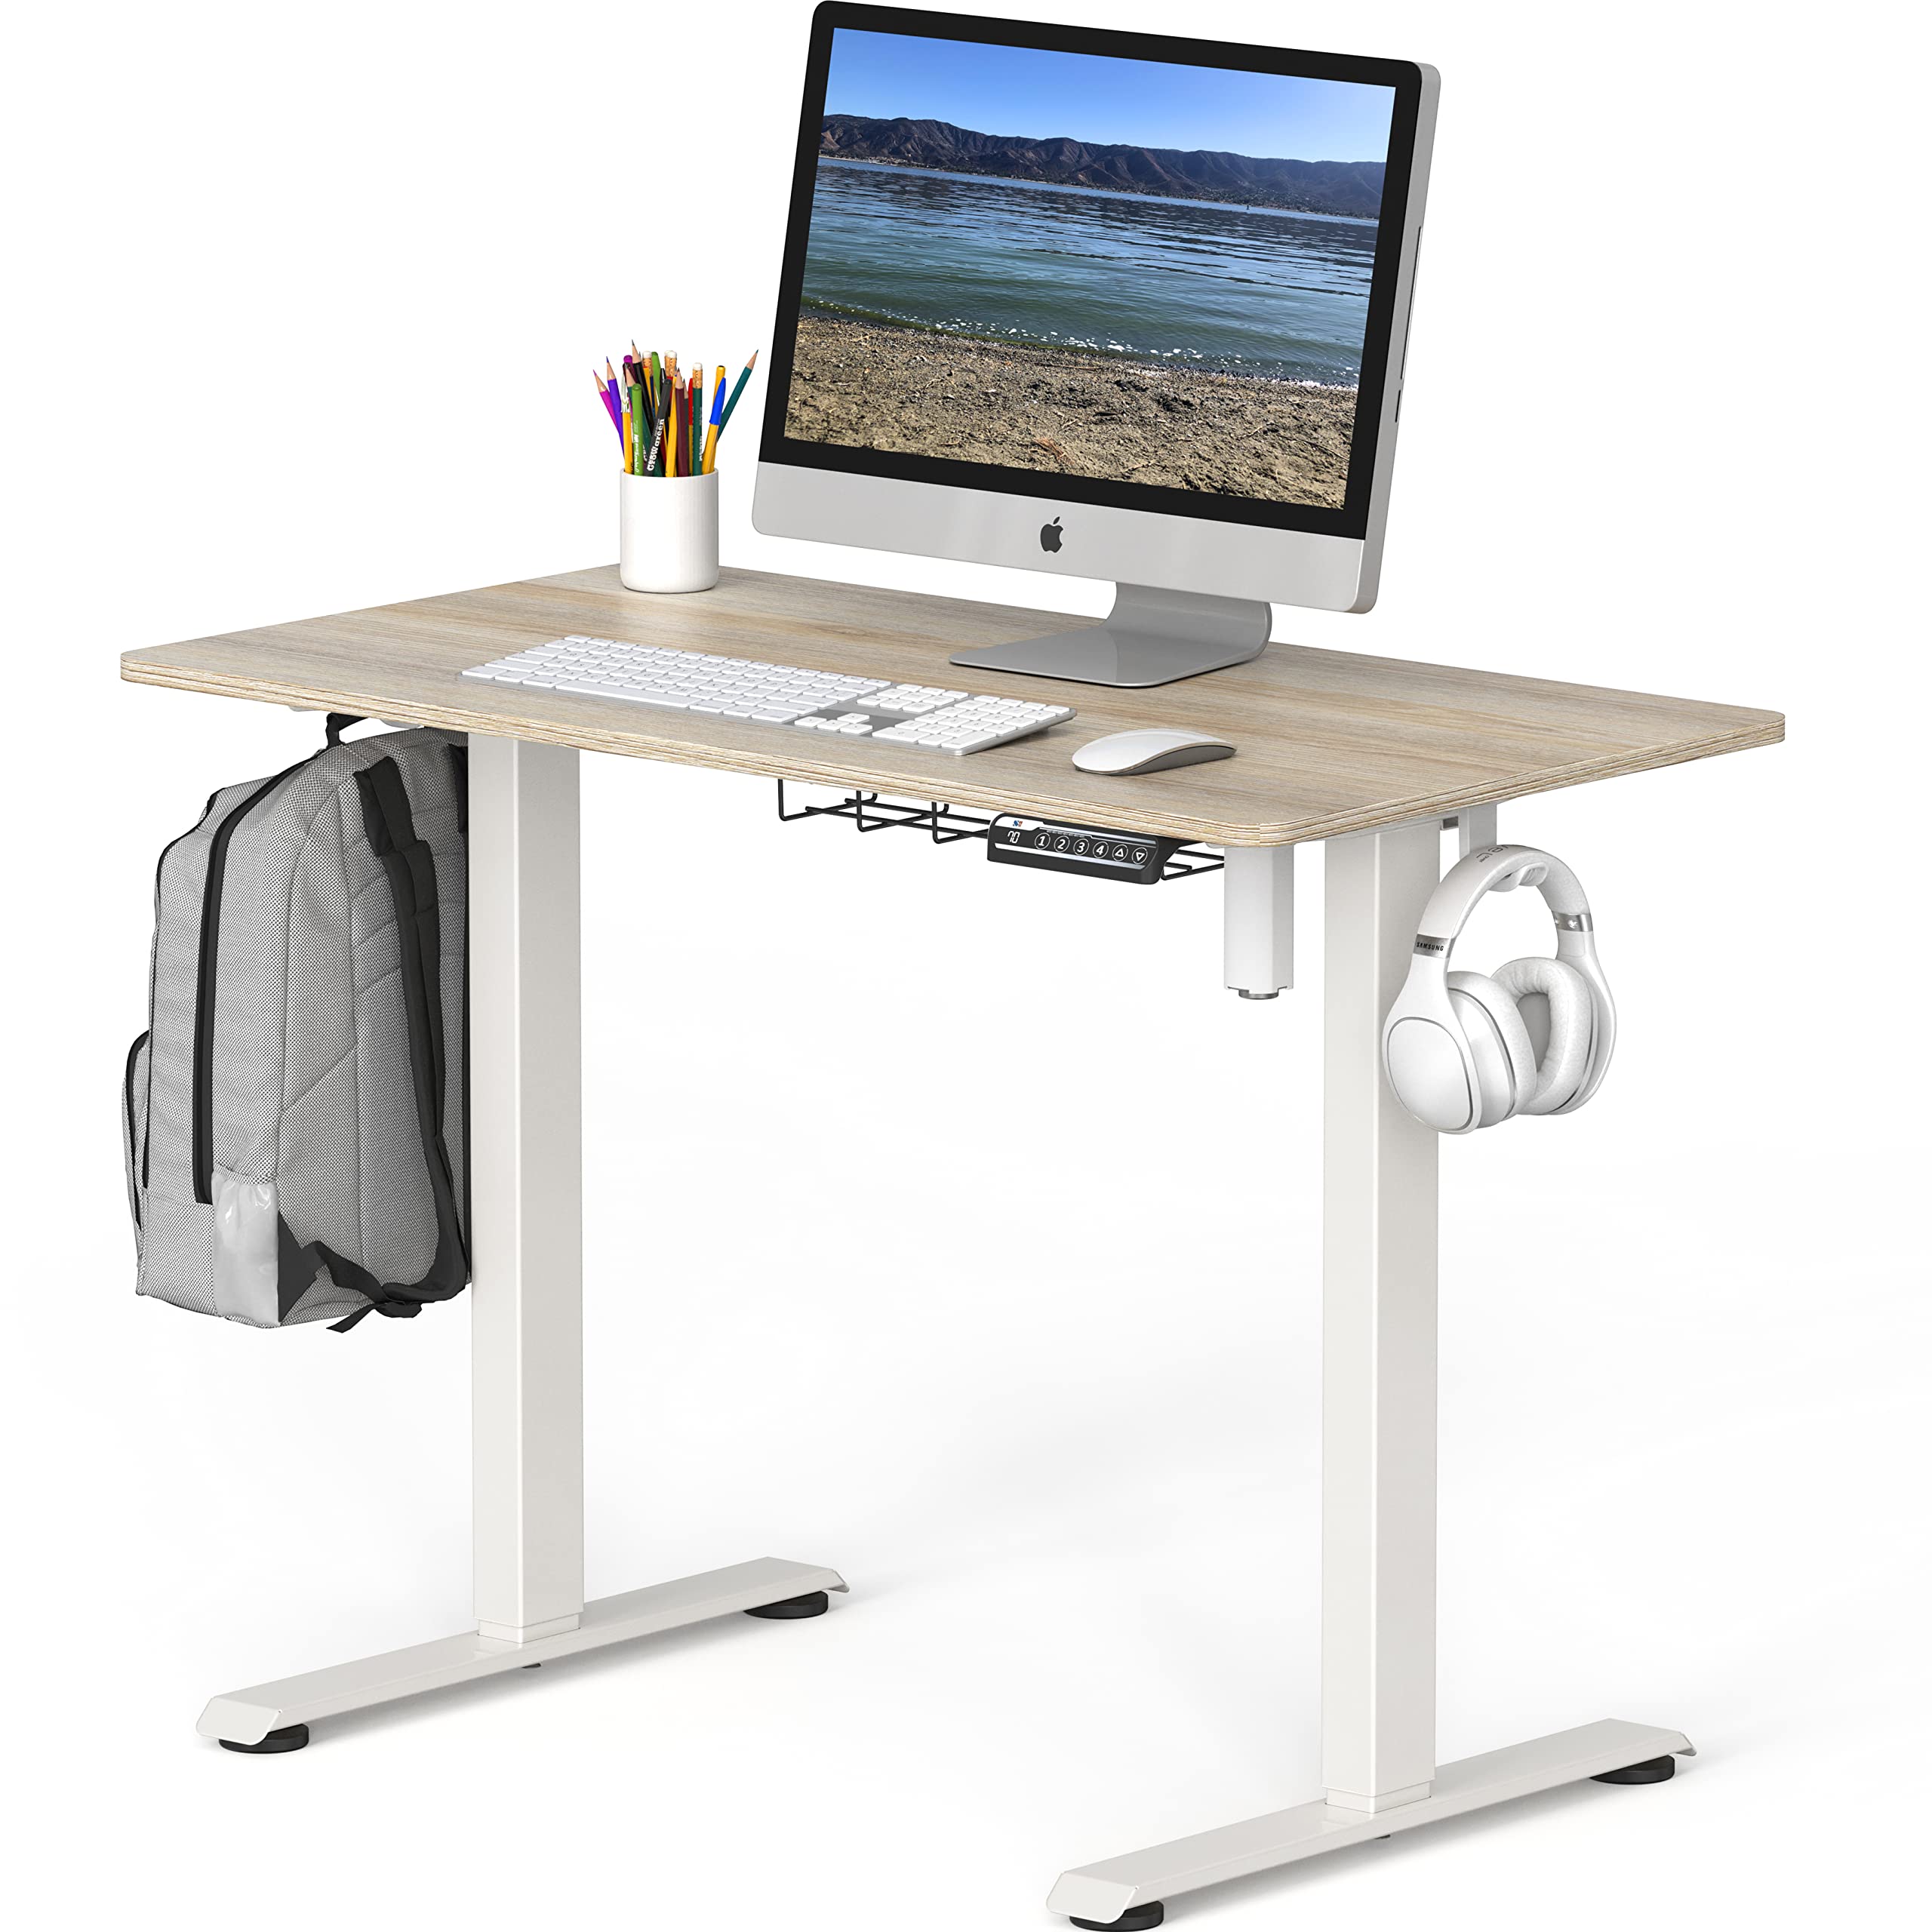 SHW Small Electric Height Adjustable Sit Stand Desk with Hanging Hooks and Cable Management, 40 x 22 Inches, White Frame and Maple Top